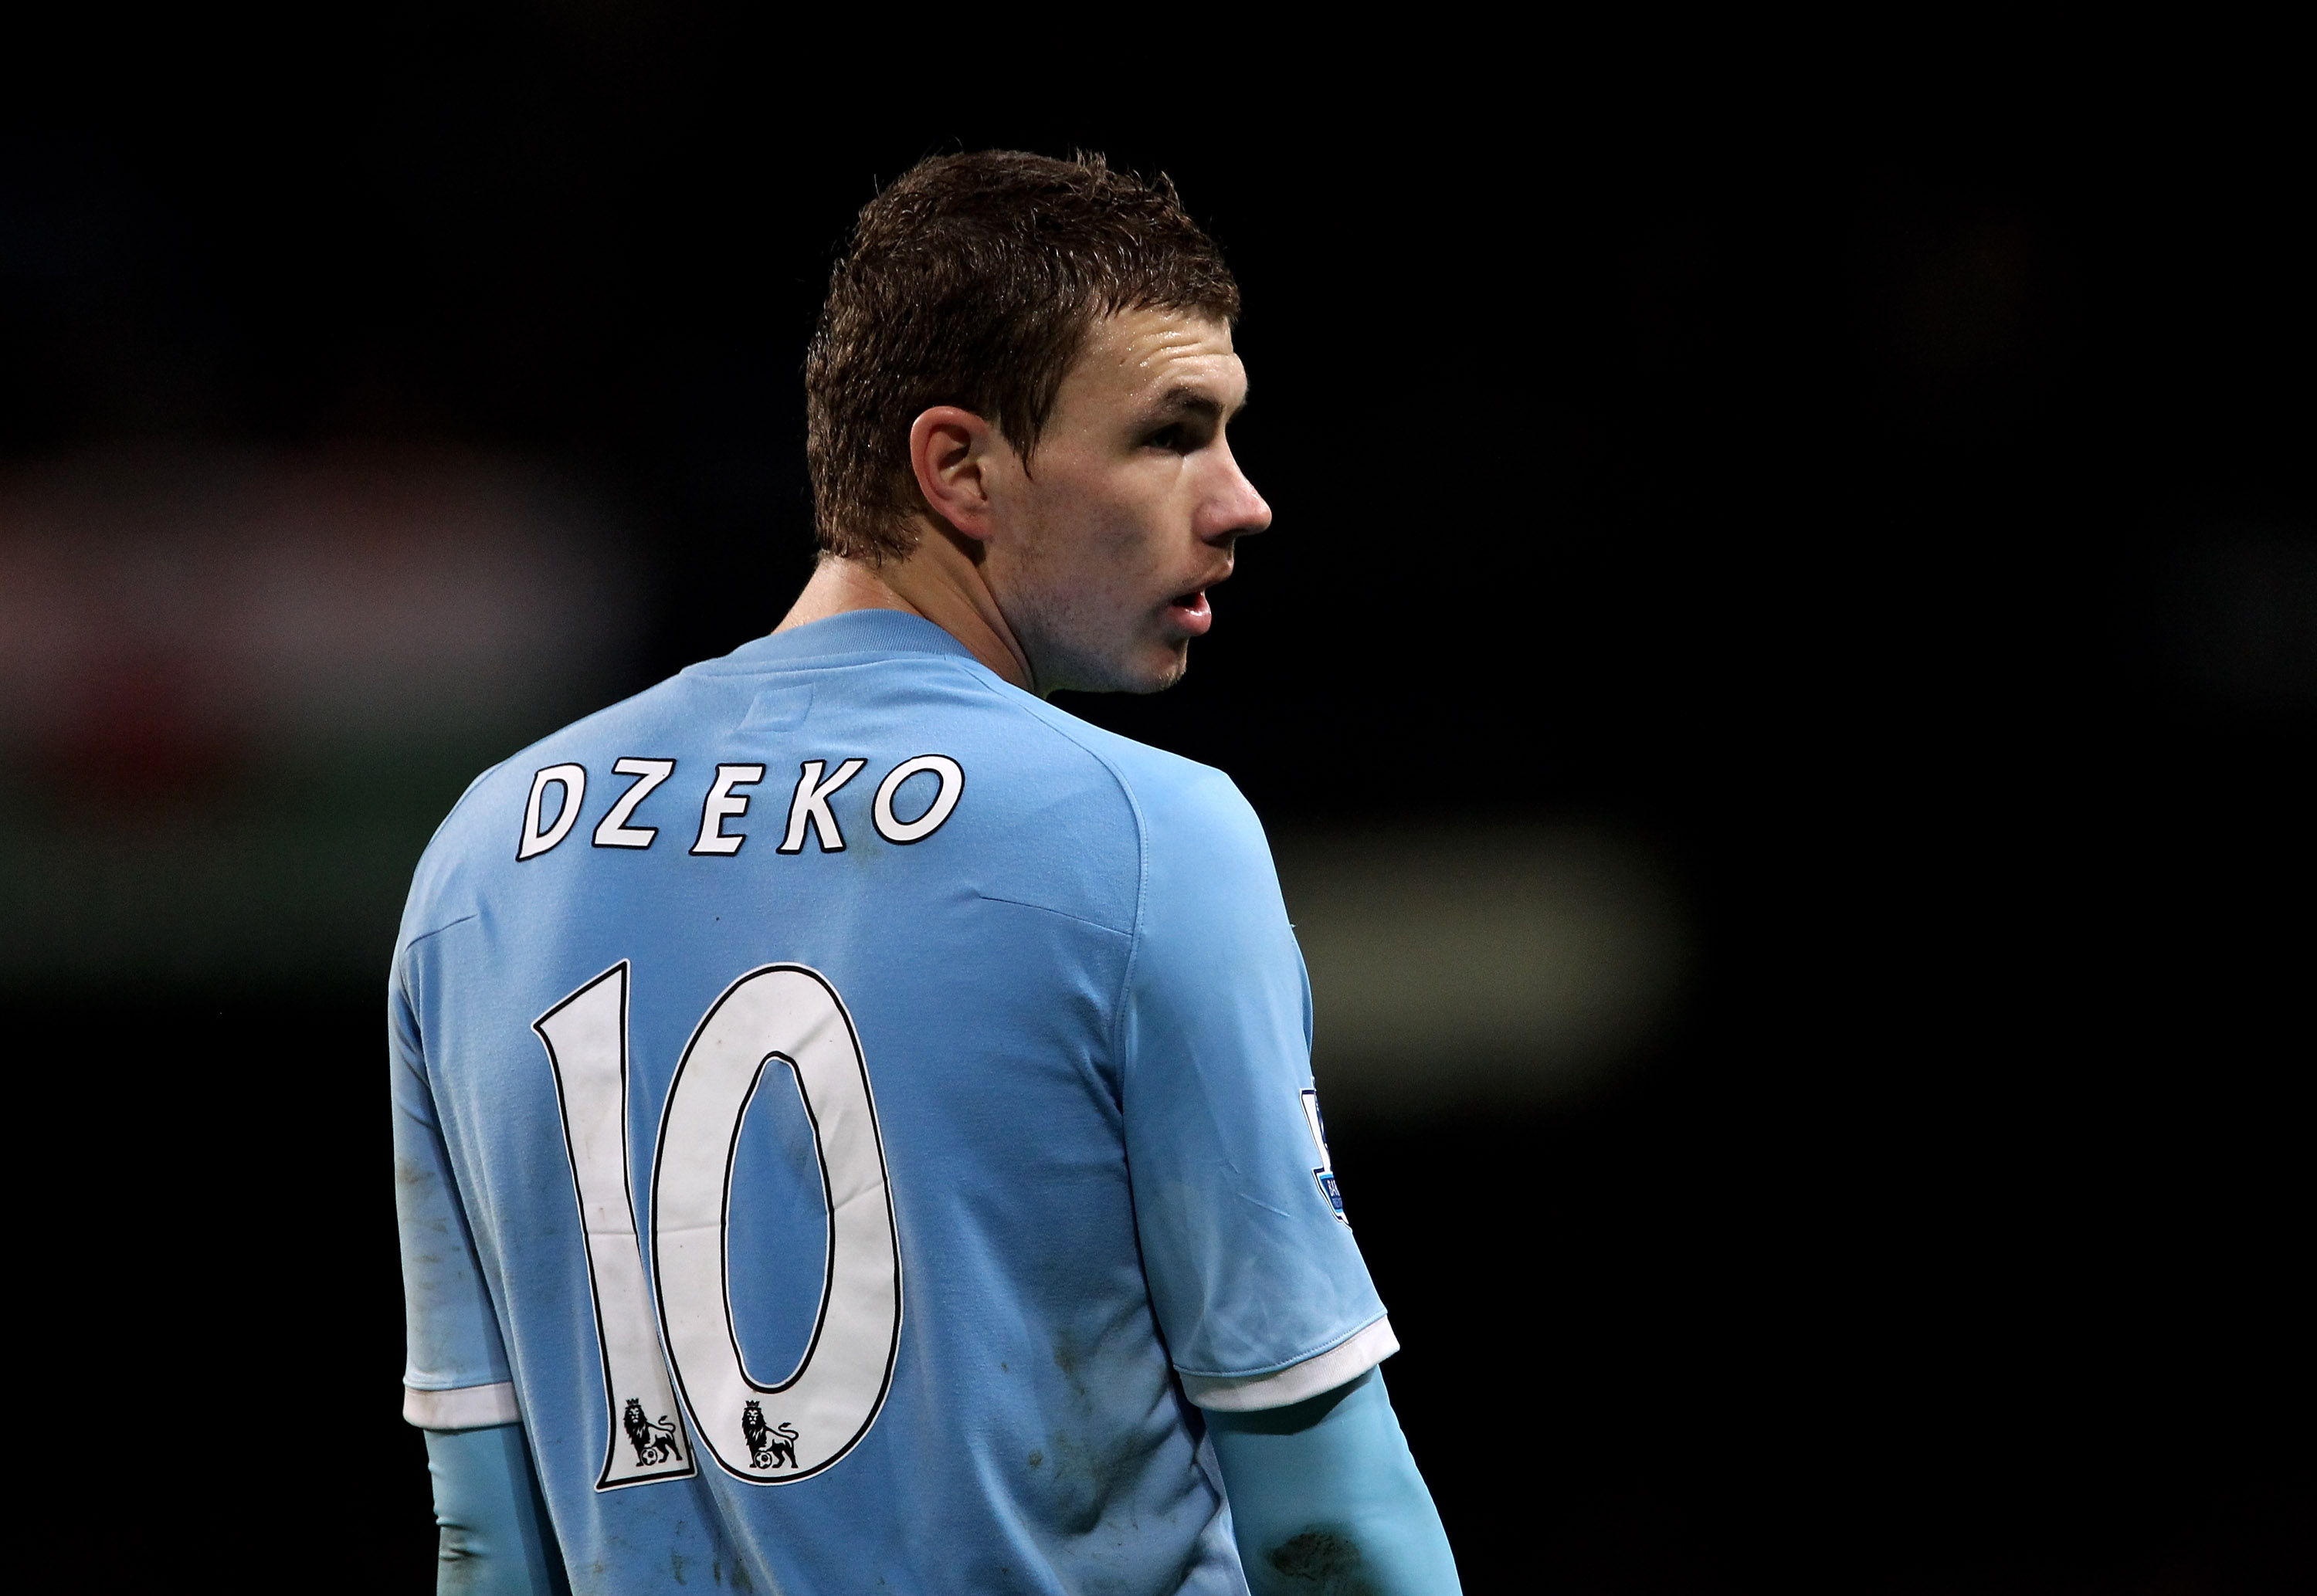 MANCHESTER, ENGLAND - JANUARY 15:  Edin Dzeko of Manchester City looks on during the Barclays Premier League match between Manchester City and Wolverhampton Wanderers at the City of Manchester Stadium on January 15, 2011 in Manchester, England.  (Photo by